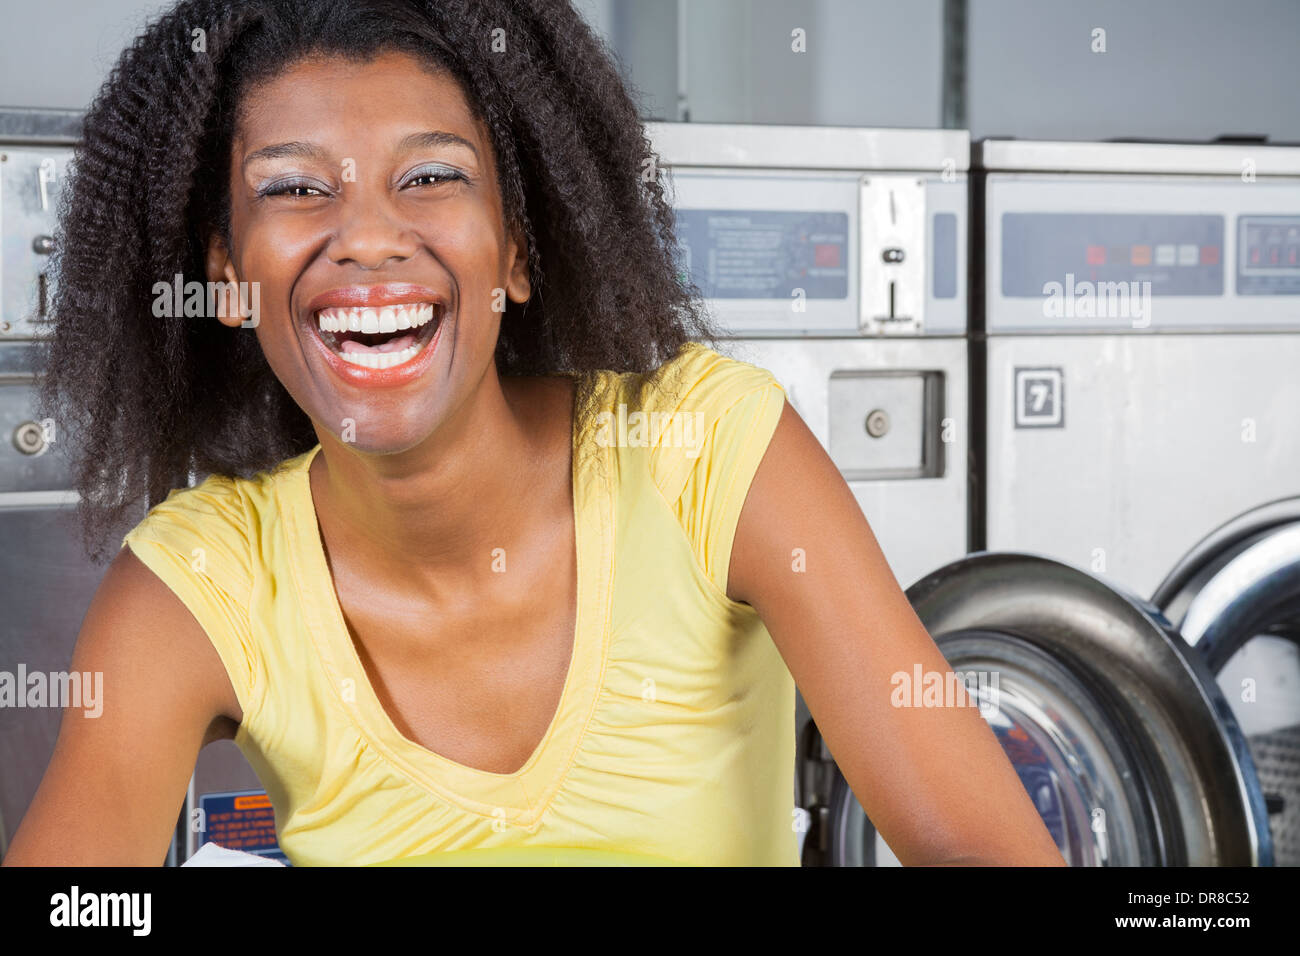 Cheerful Woman In Laundry Stock Photo